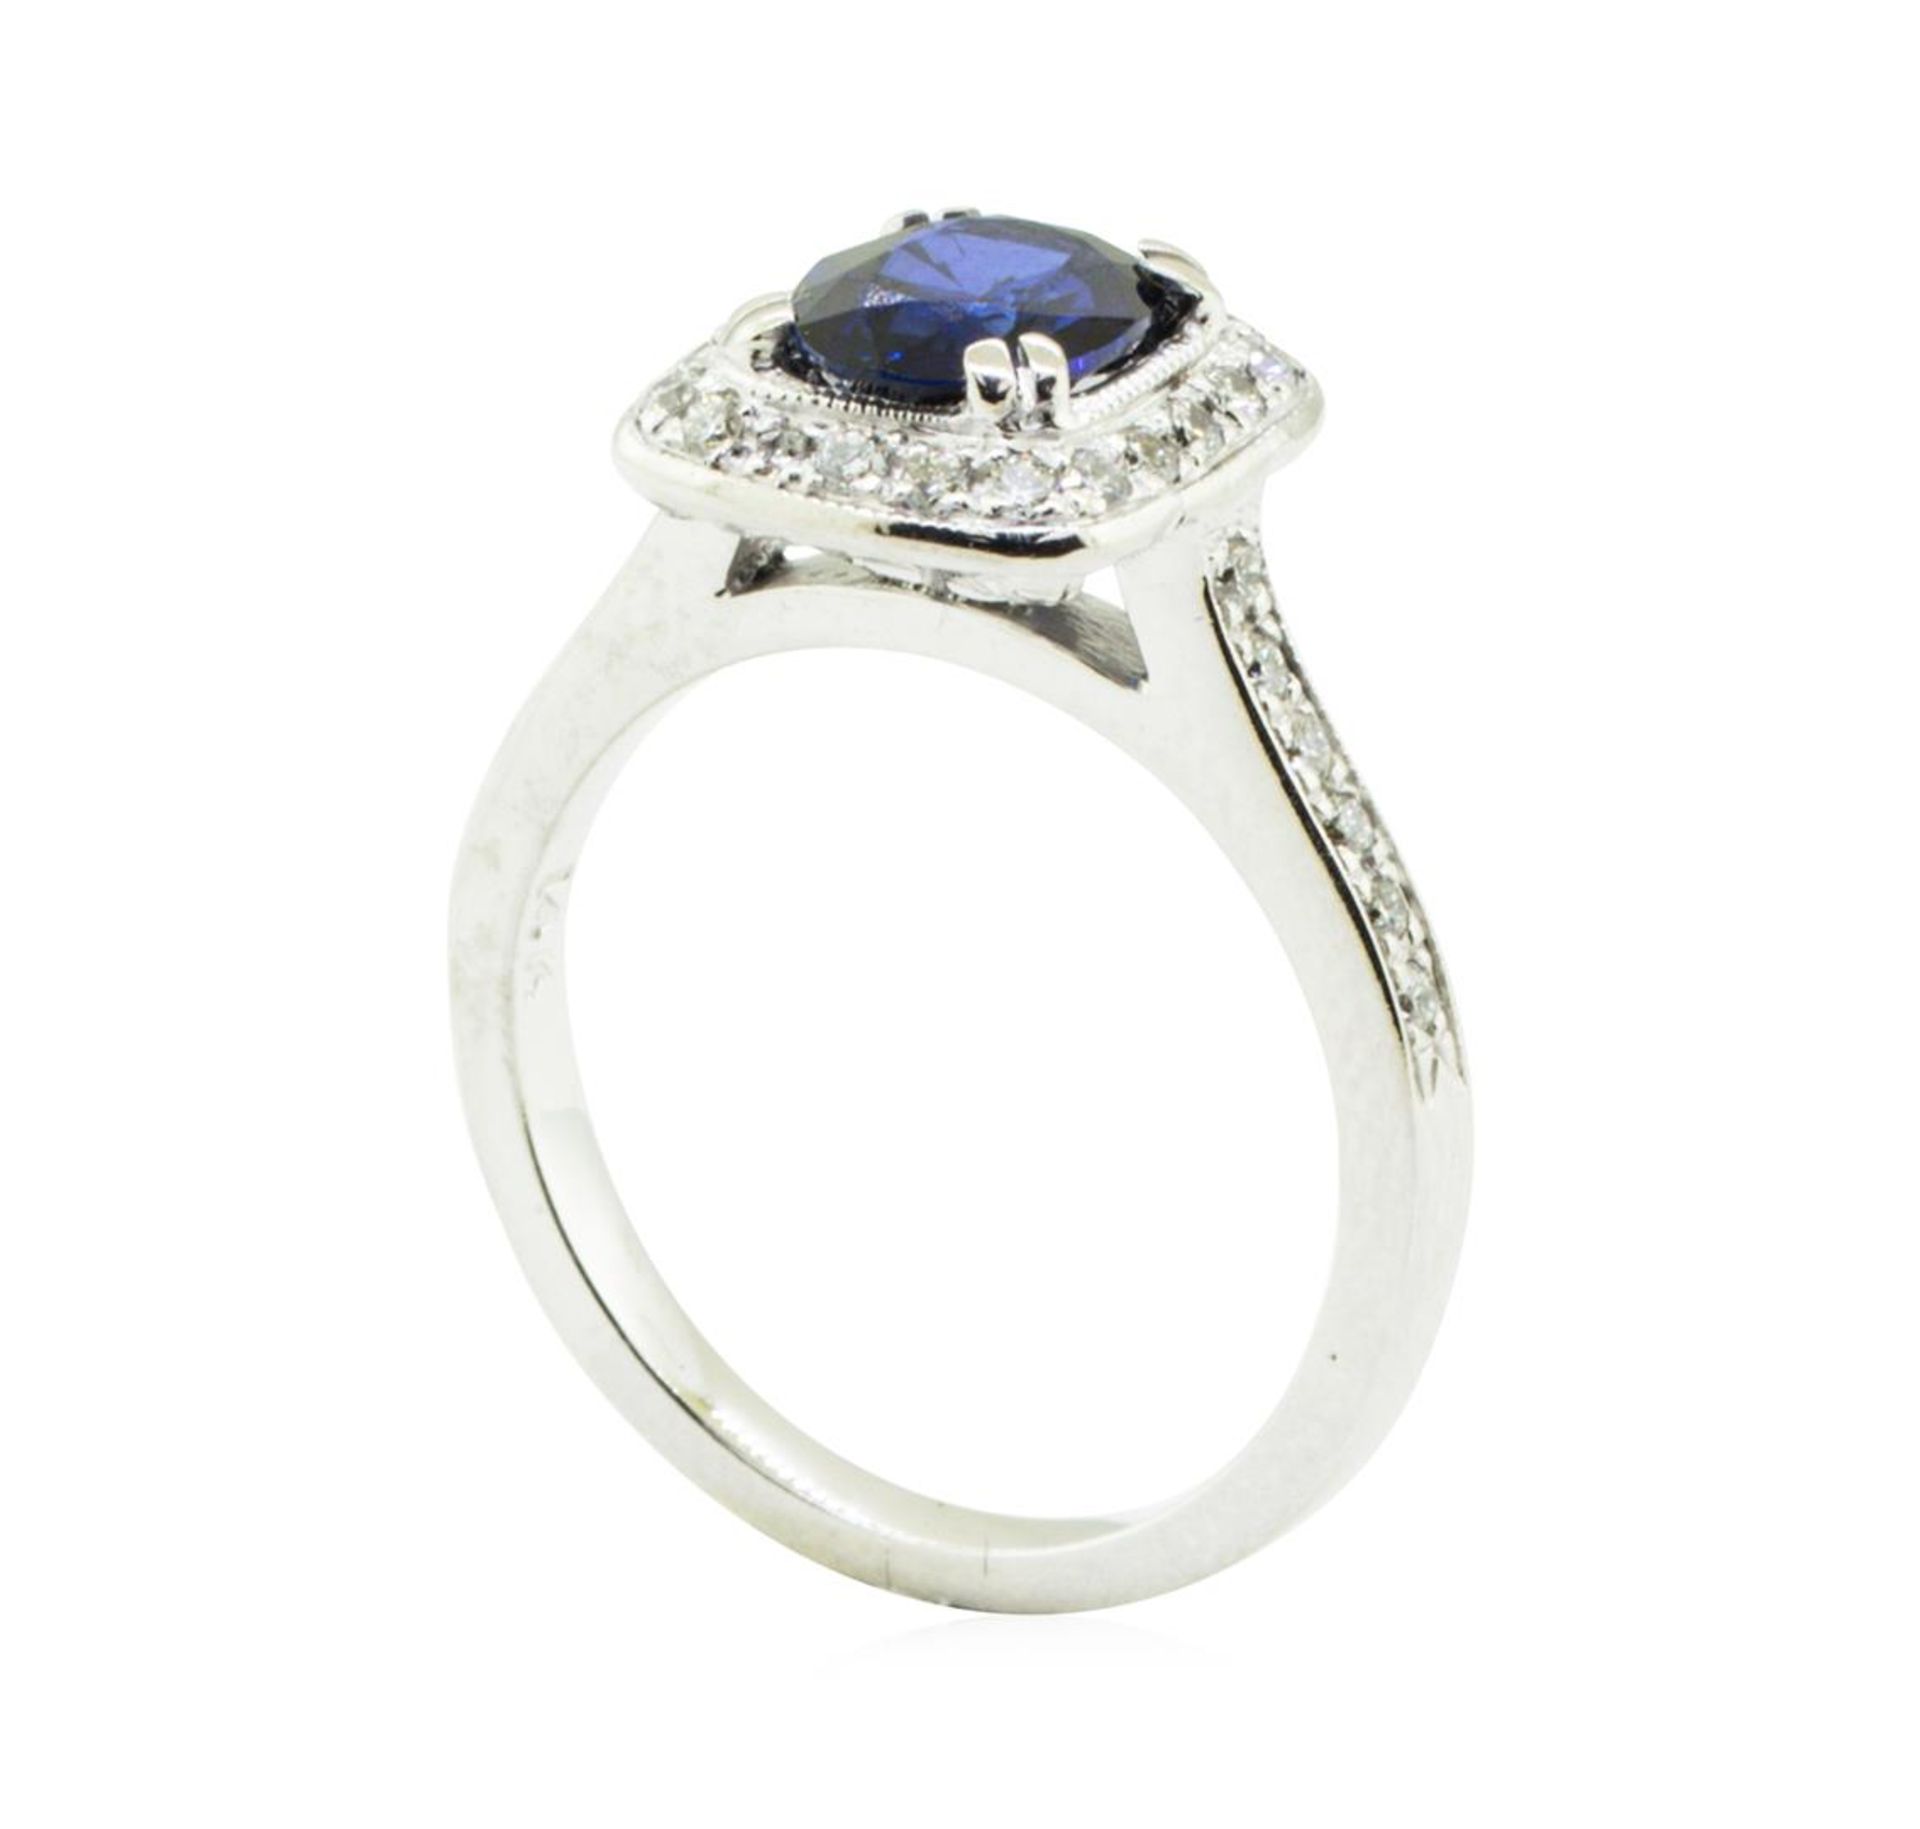 1.68 ctw Oval Brilliant Blue Sapphire And Diamond Ring - 14KT White Gold - Image 4 of 5